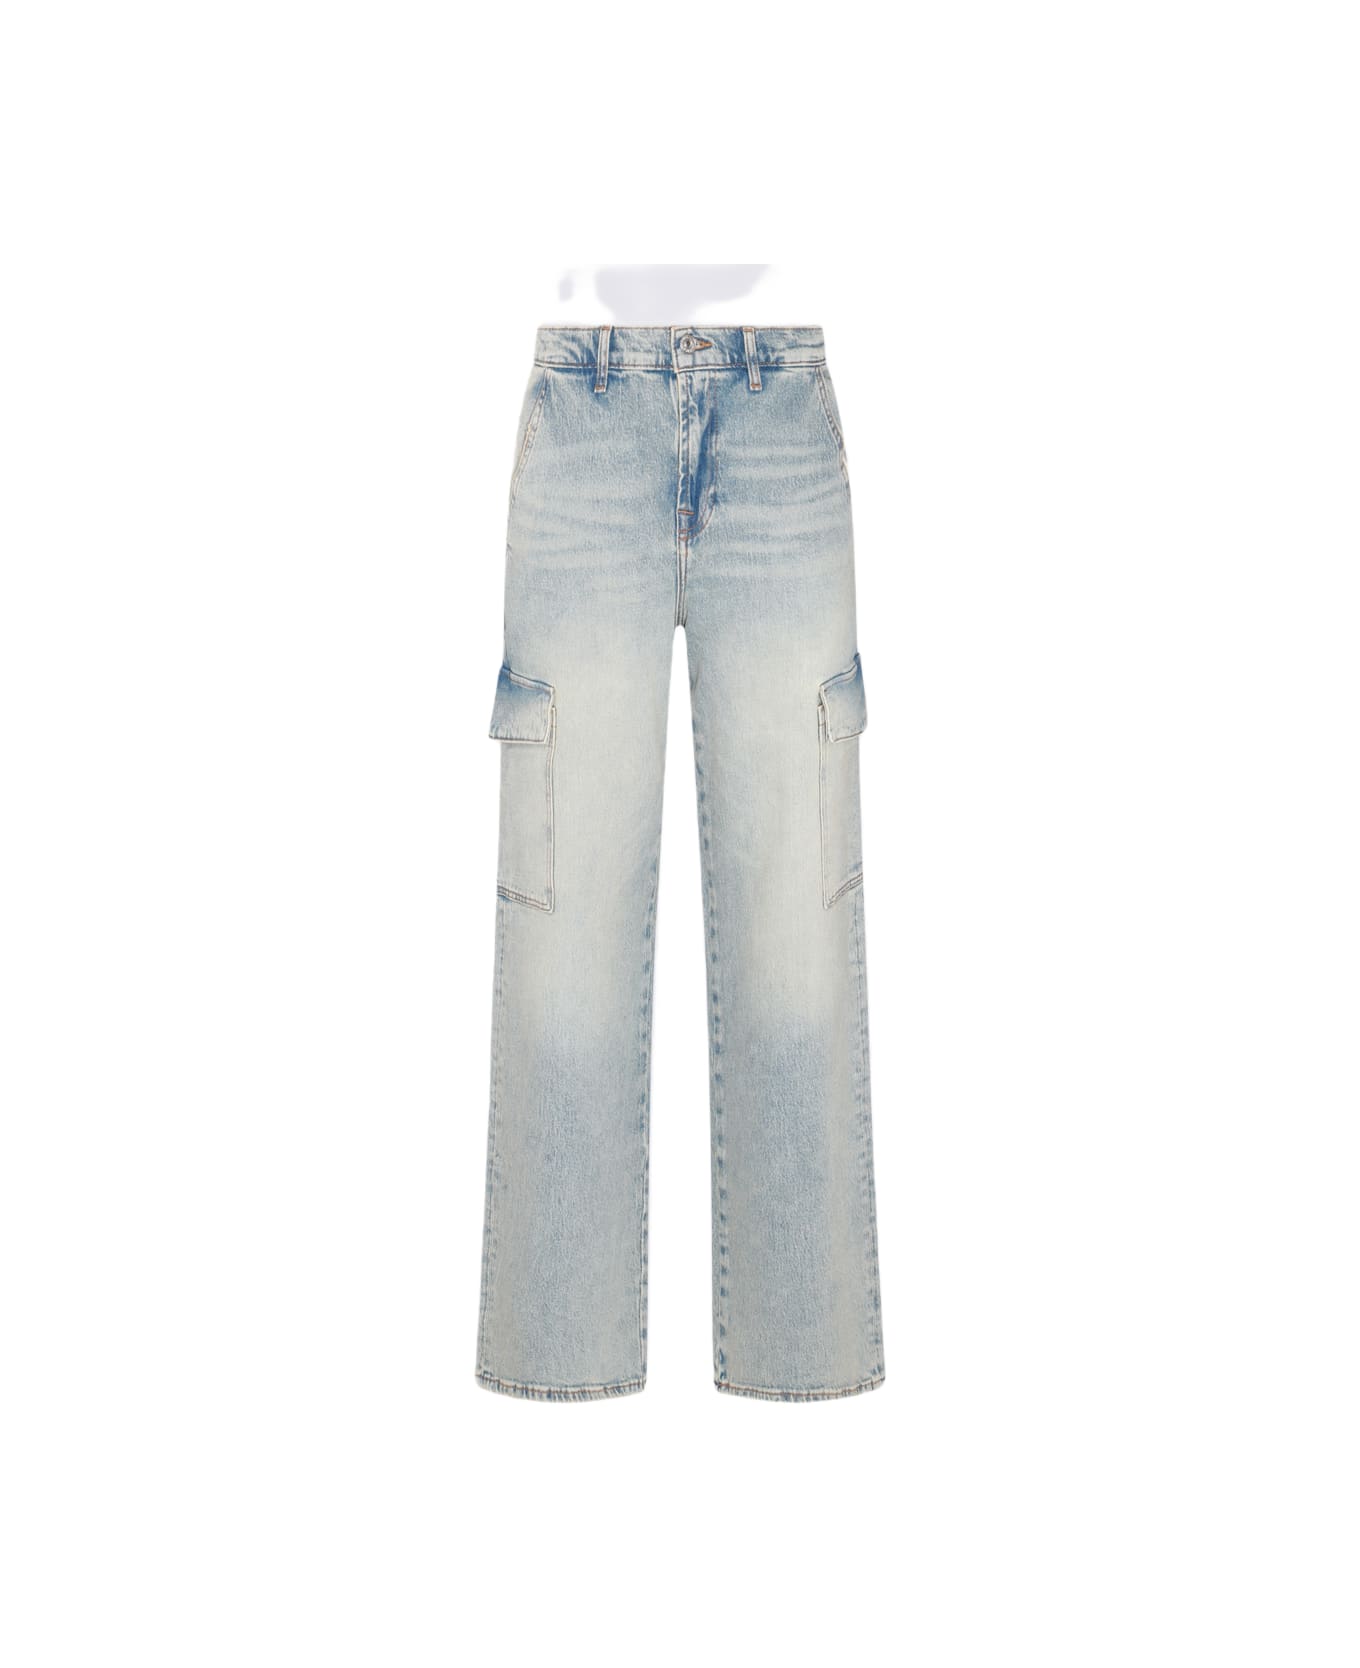 7 For All Mankind Light Blue Cotton Blend Cargo Jeans - FROST